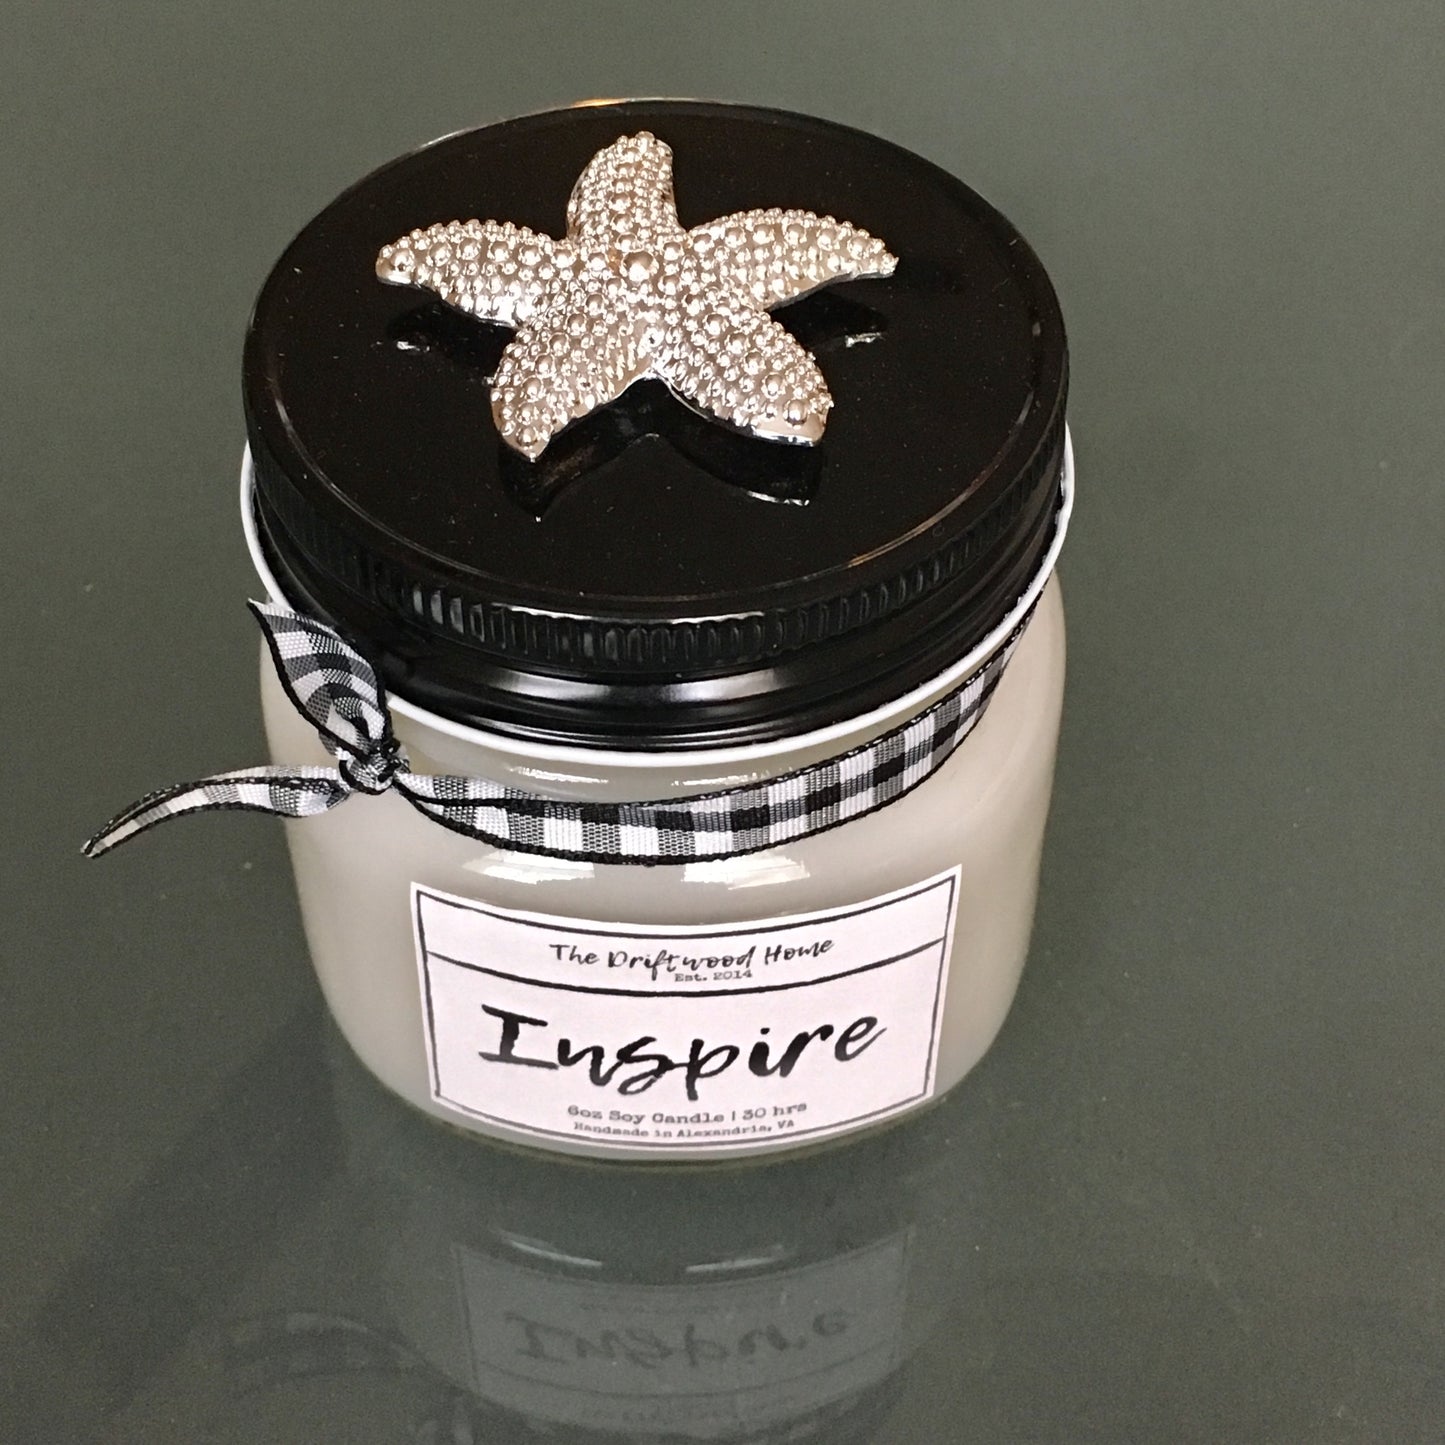 Starfish Candle Magnet - Starfish Magnet - Beach Magnet